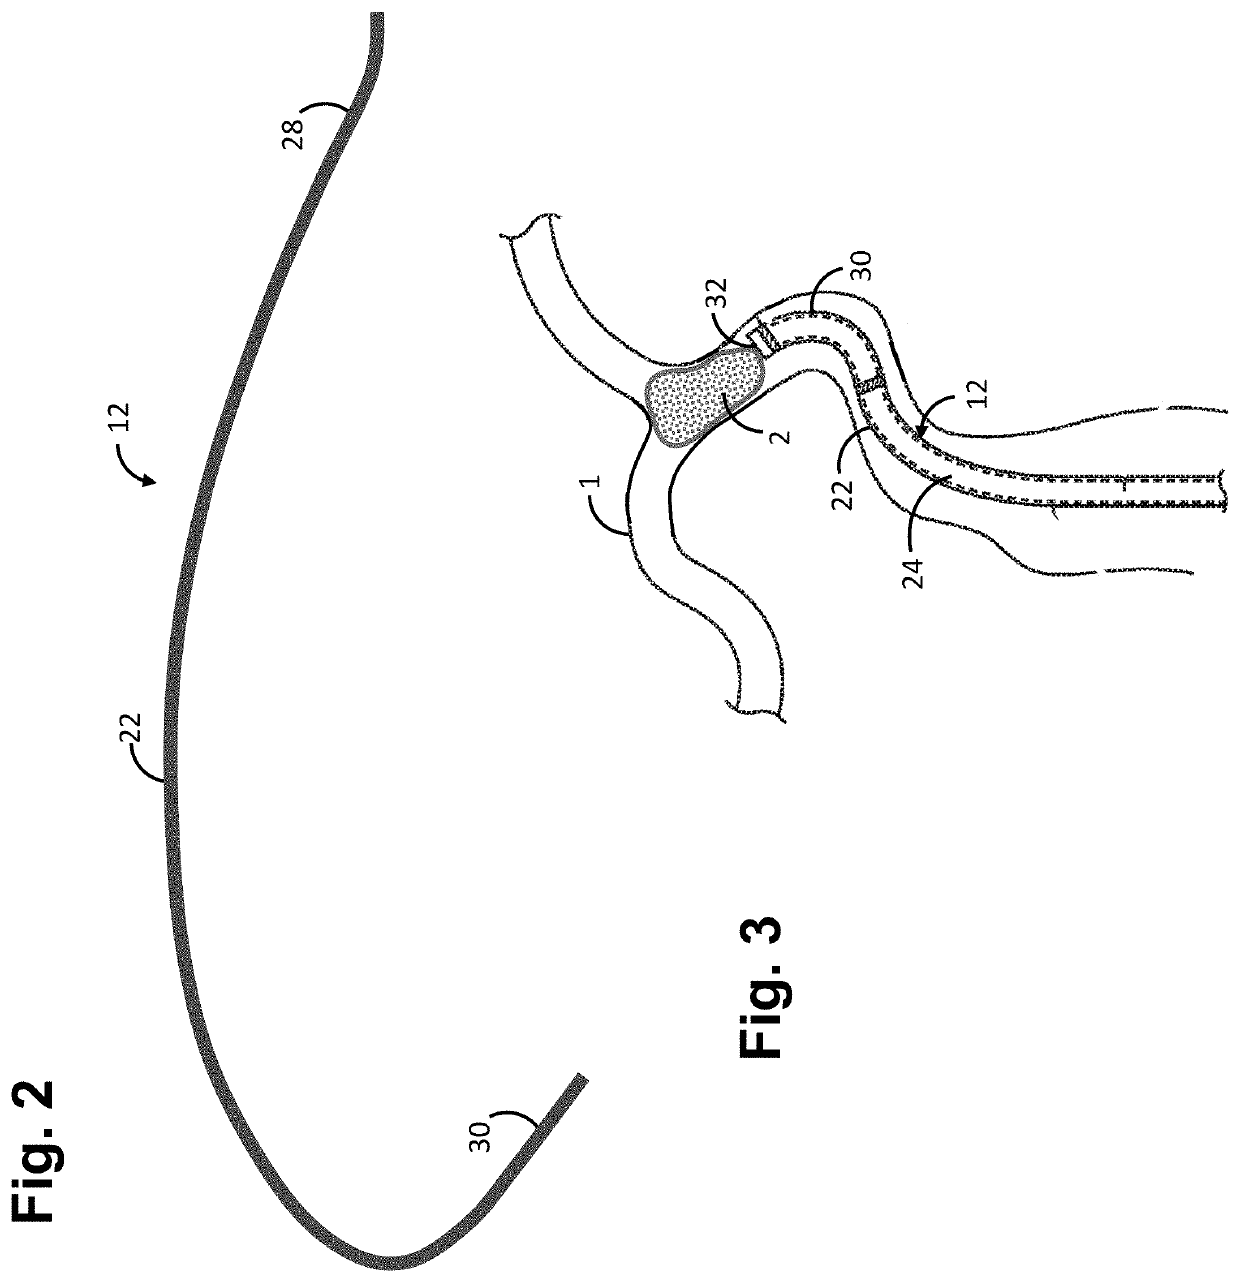 Mechanically resonant pulse relief valve for assisted clearing of plugged aspiration